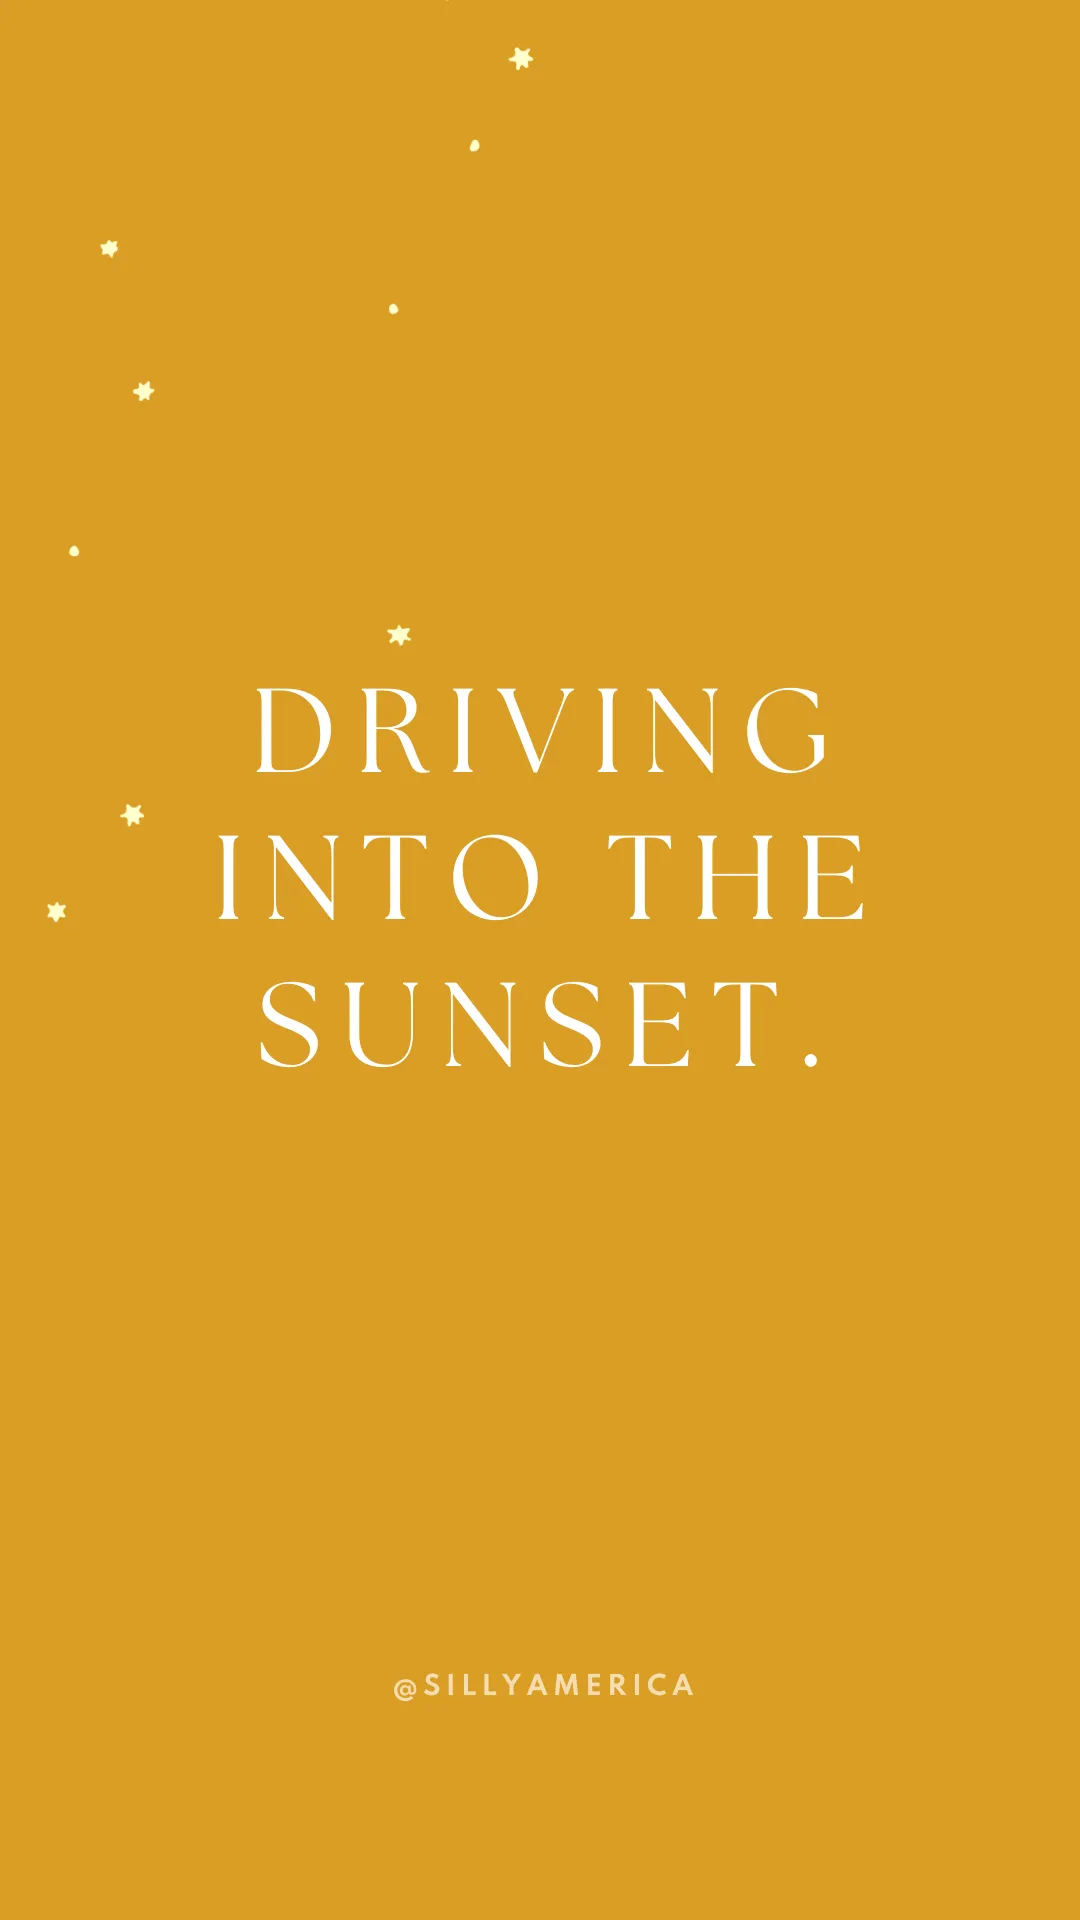 Driving into the sunset. - Road Trip Captions for Instagram